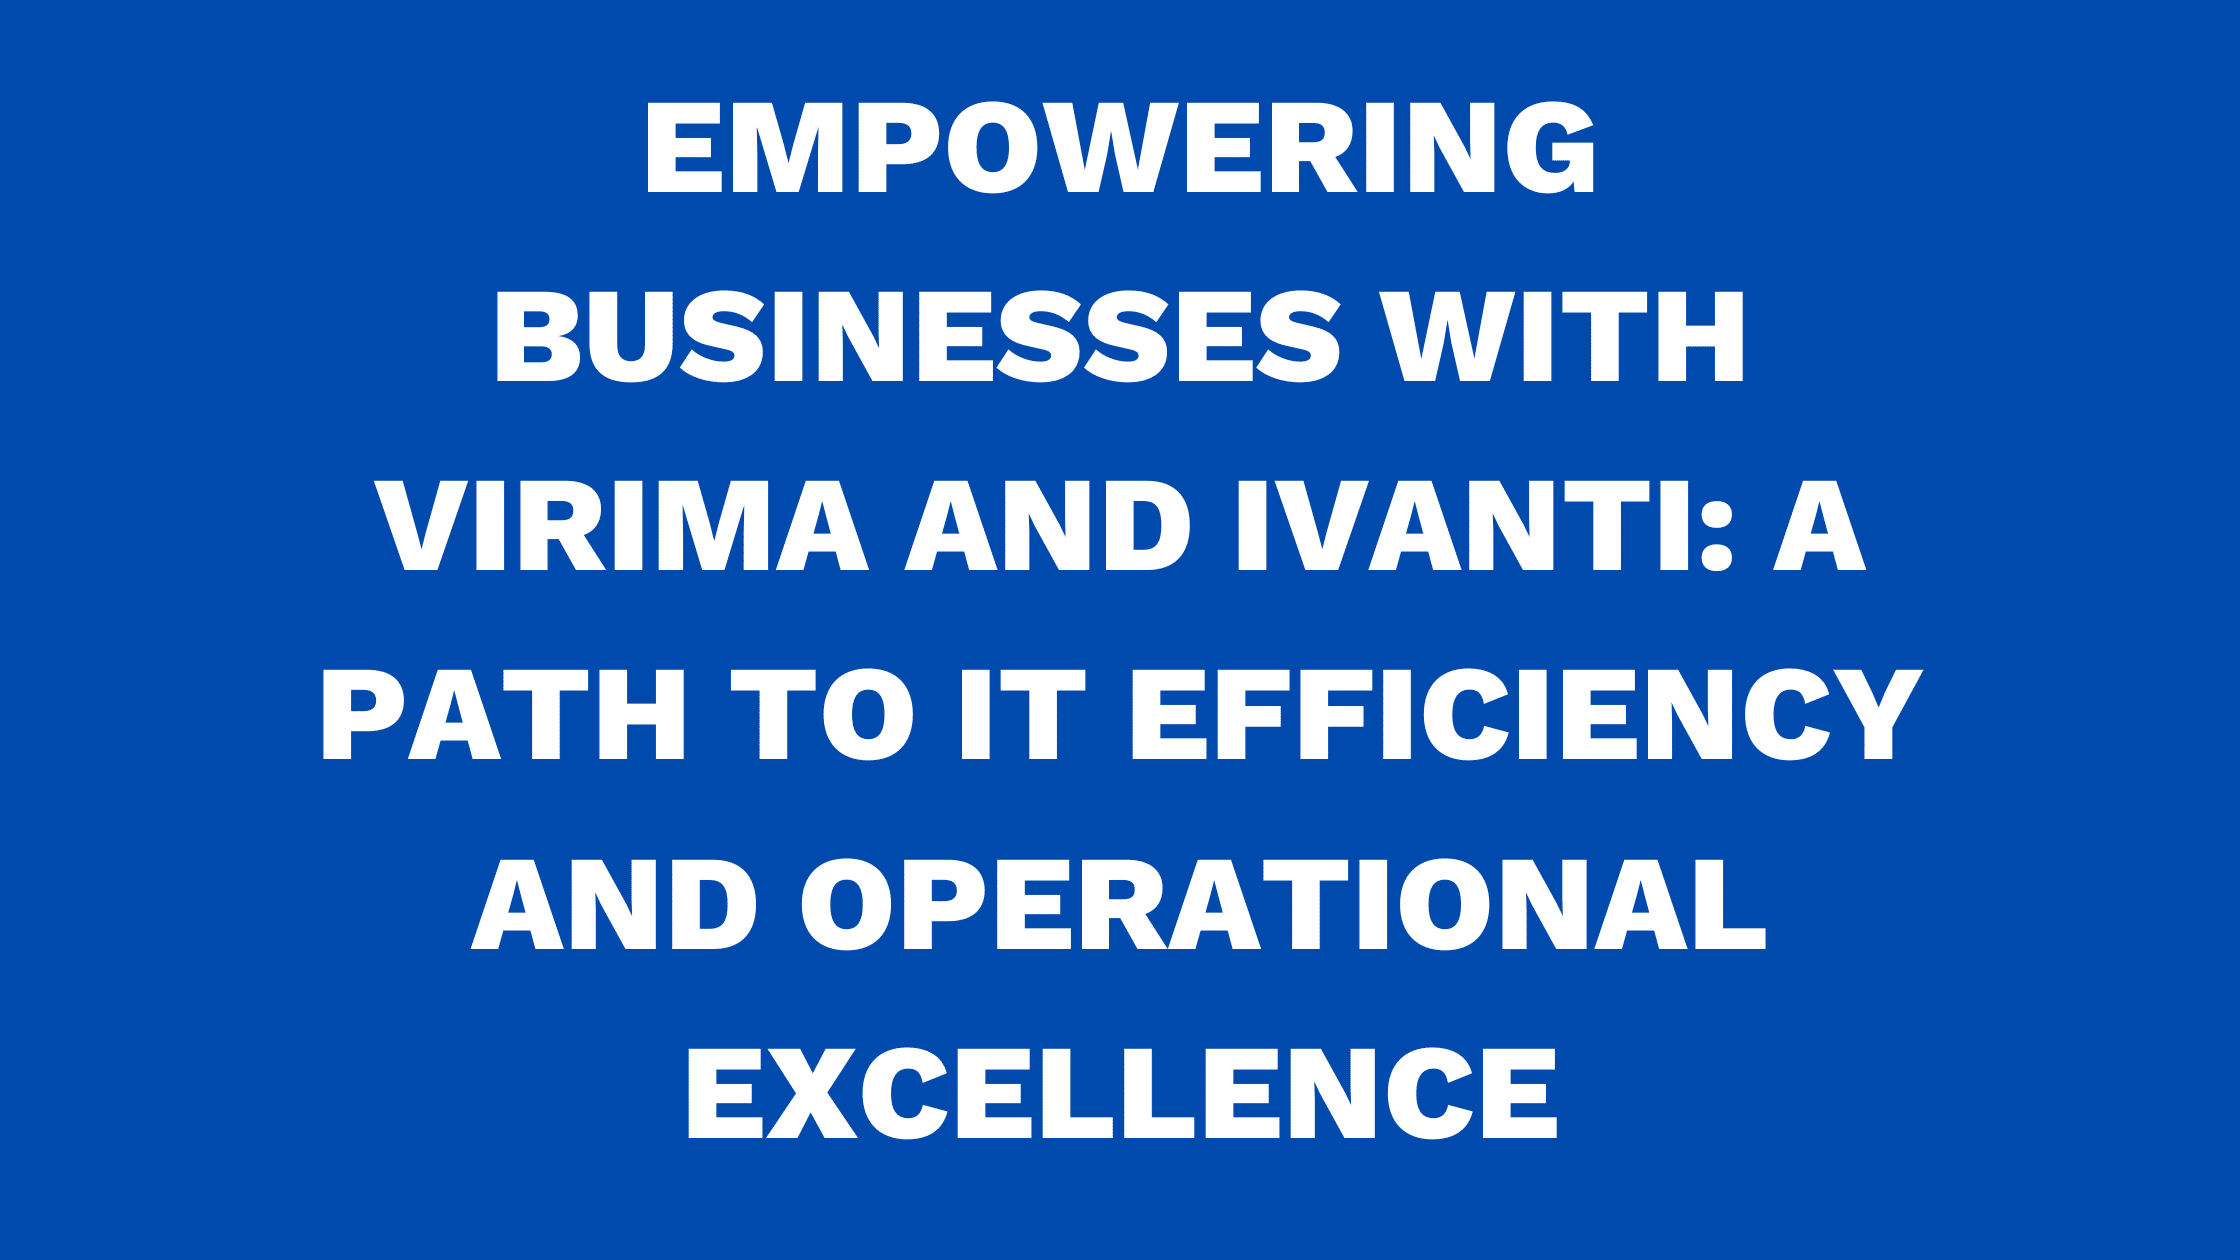 Empowering businesses with Virima and Ivanti: A path to IT efficiency and operational excellence